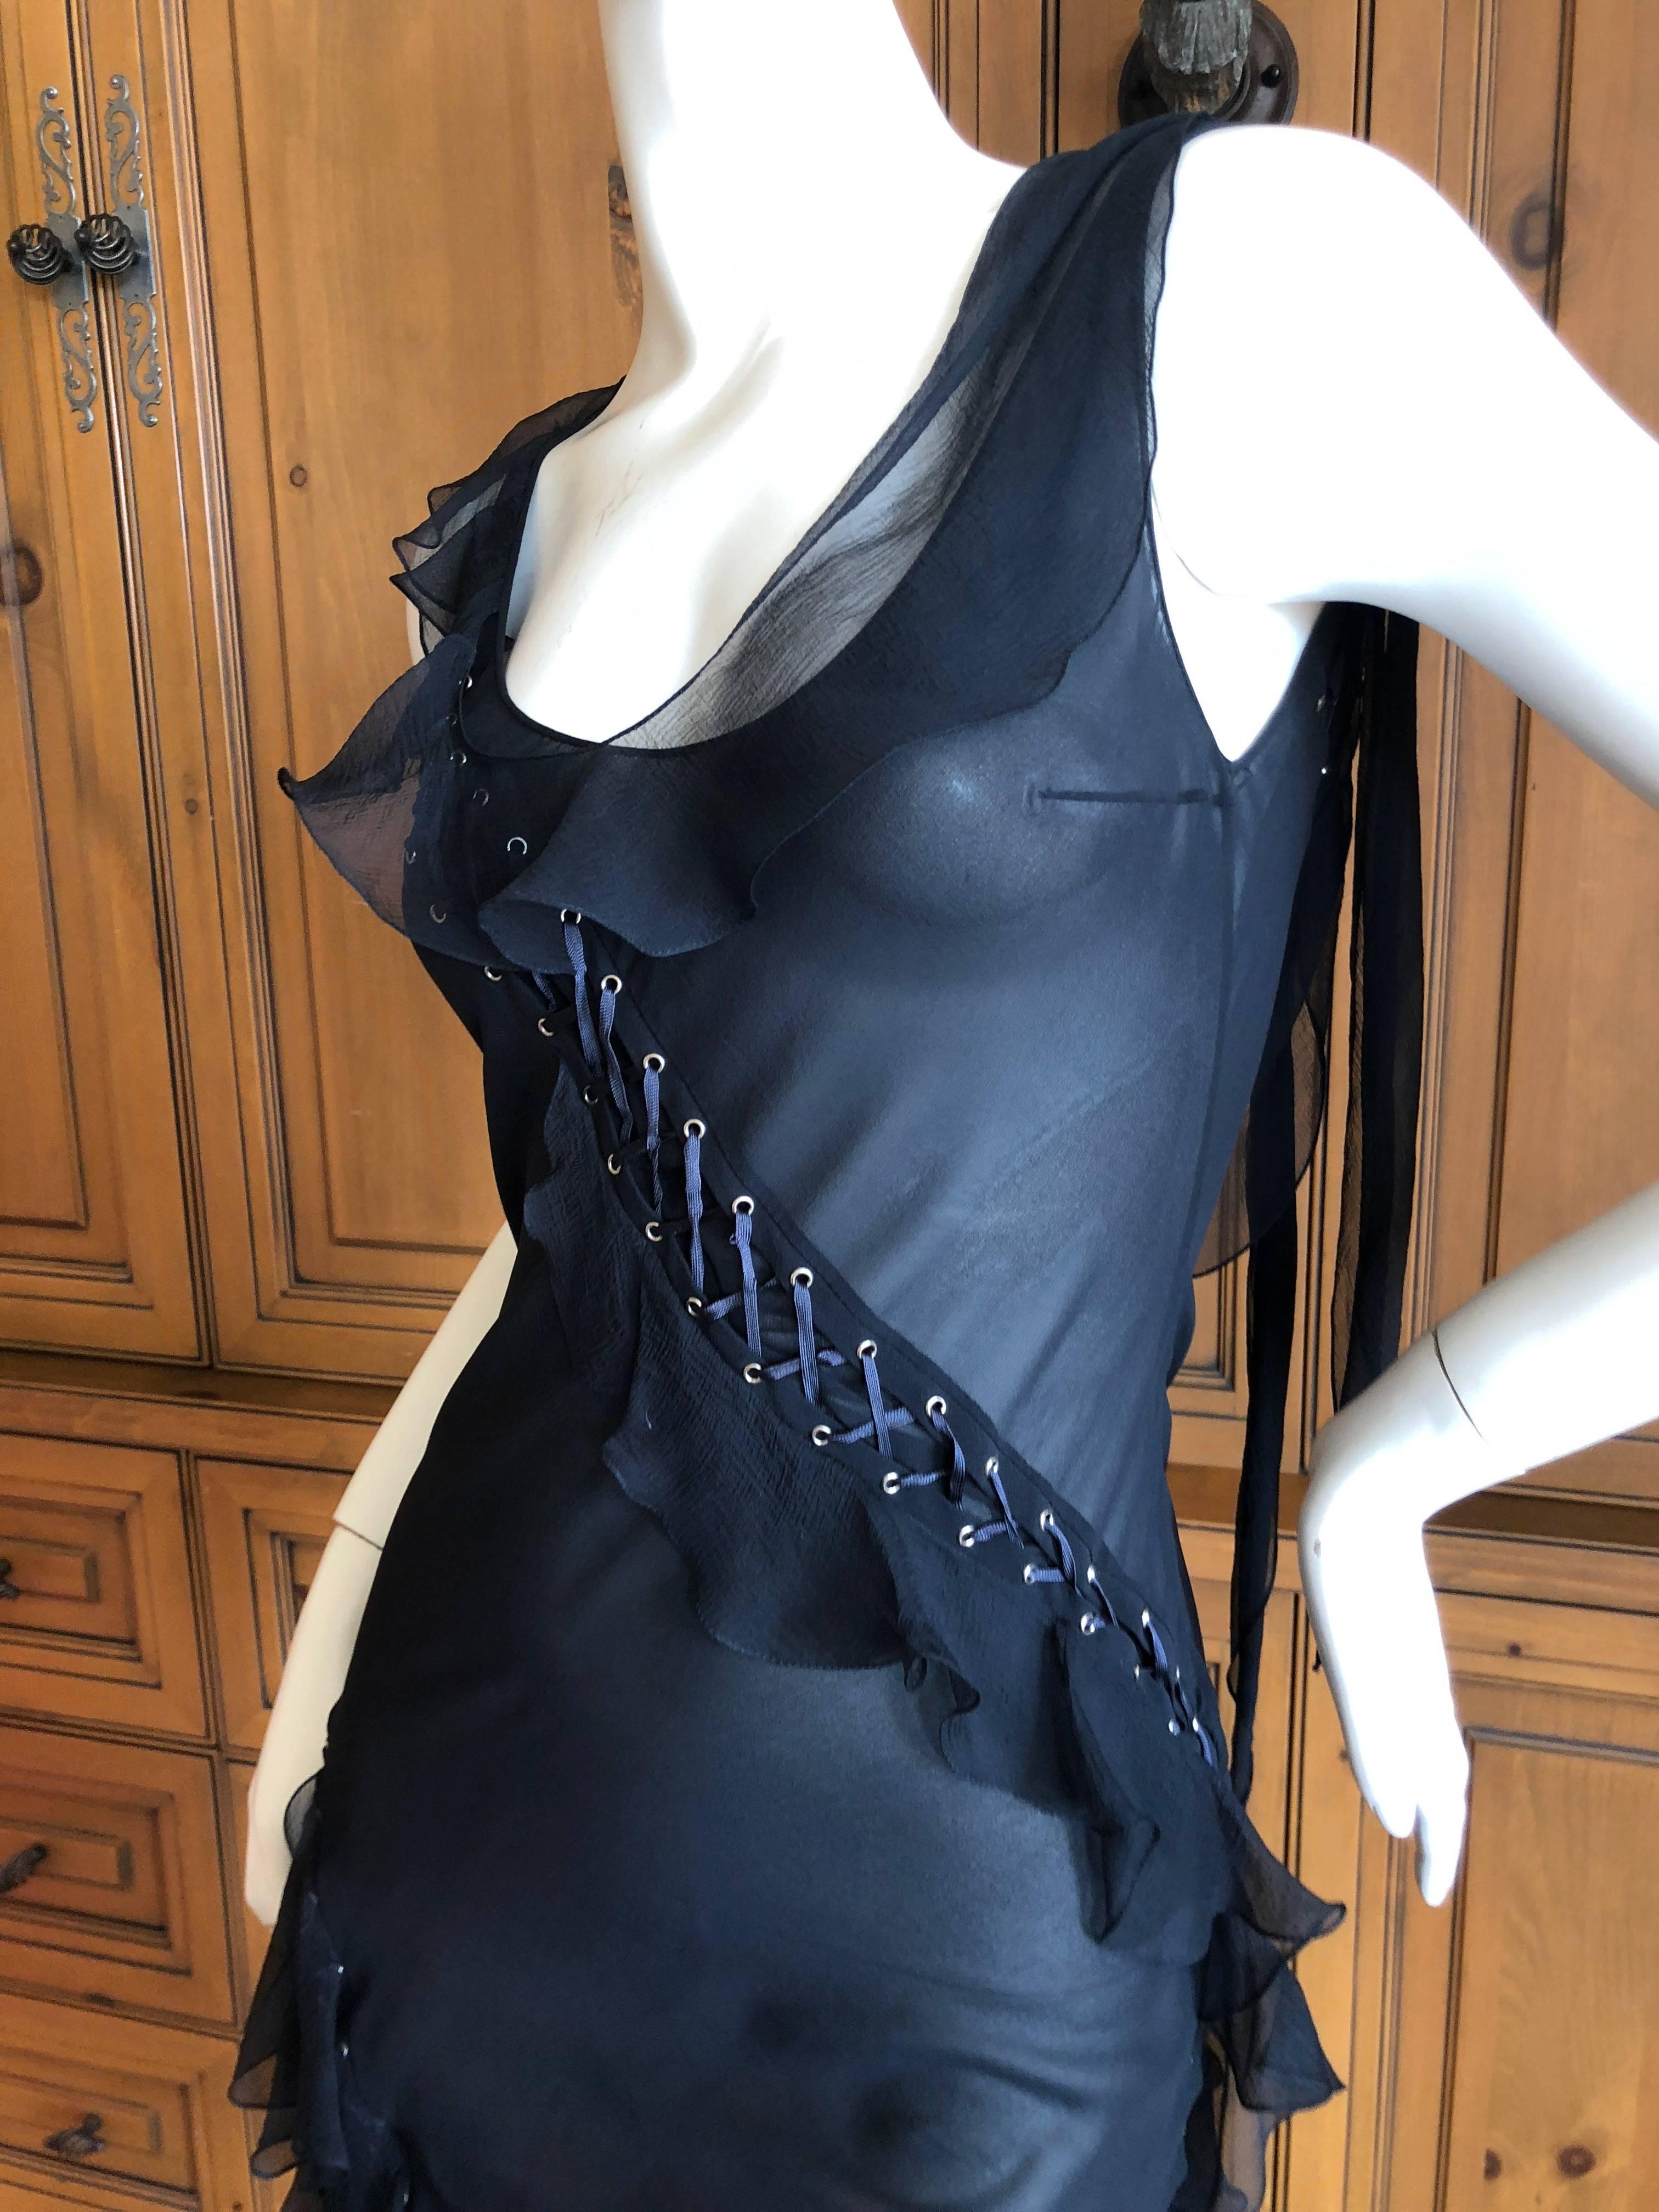 Christian Dior by John Galliano Vintage Sheer Black Dress Corset Lace Up Details 2